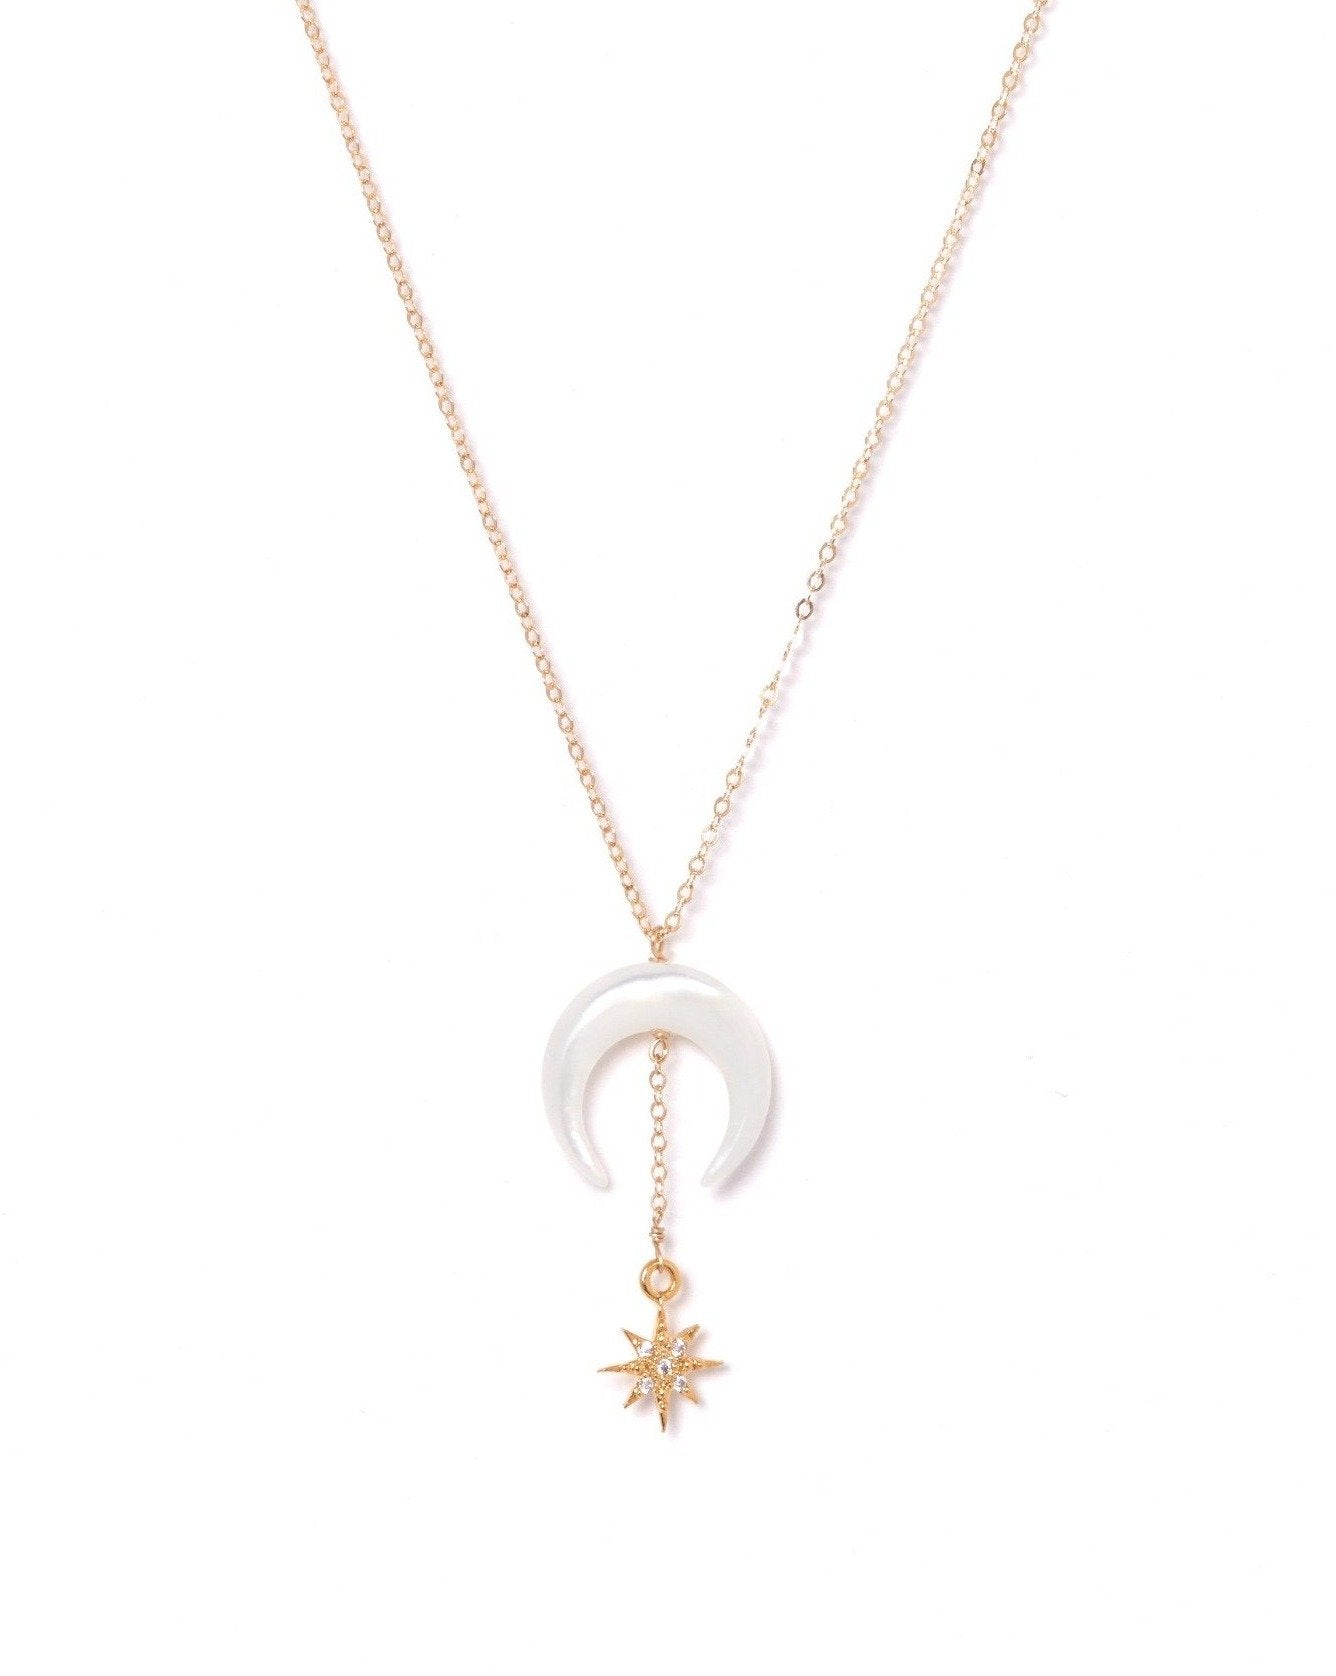 Stella Necklace by KOZAKH. A 16 to 18 inch adjustable length necklace, crafted in 14K Gold Filled, featuring a hand carved Mother of Pearl crescent moon charm and a Cubic Zirconia encrusted 6 point star.